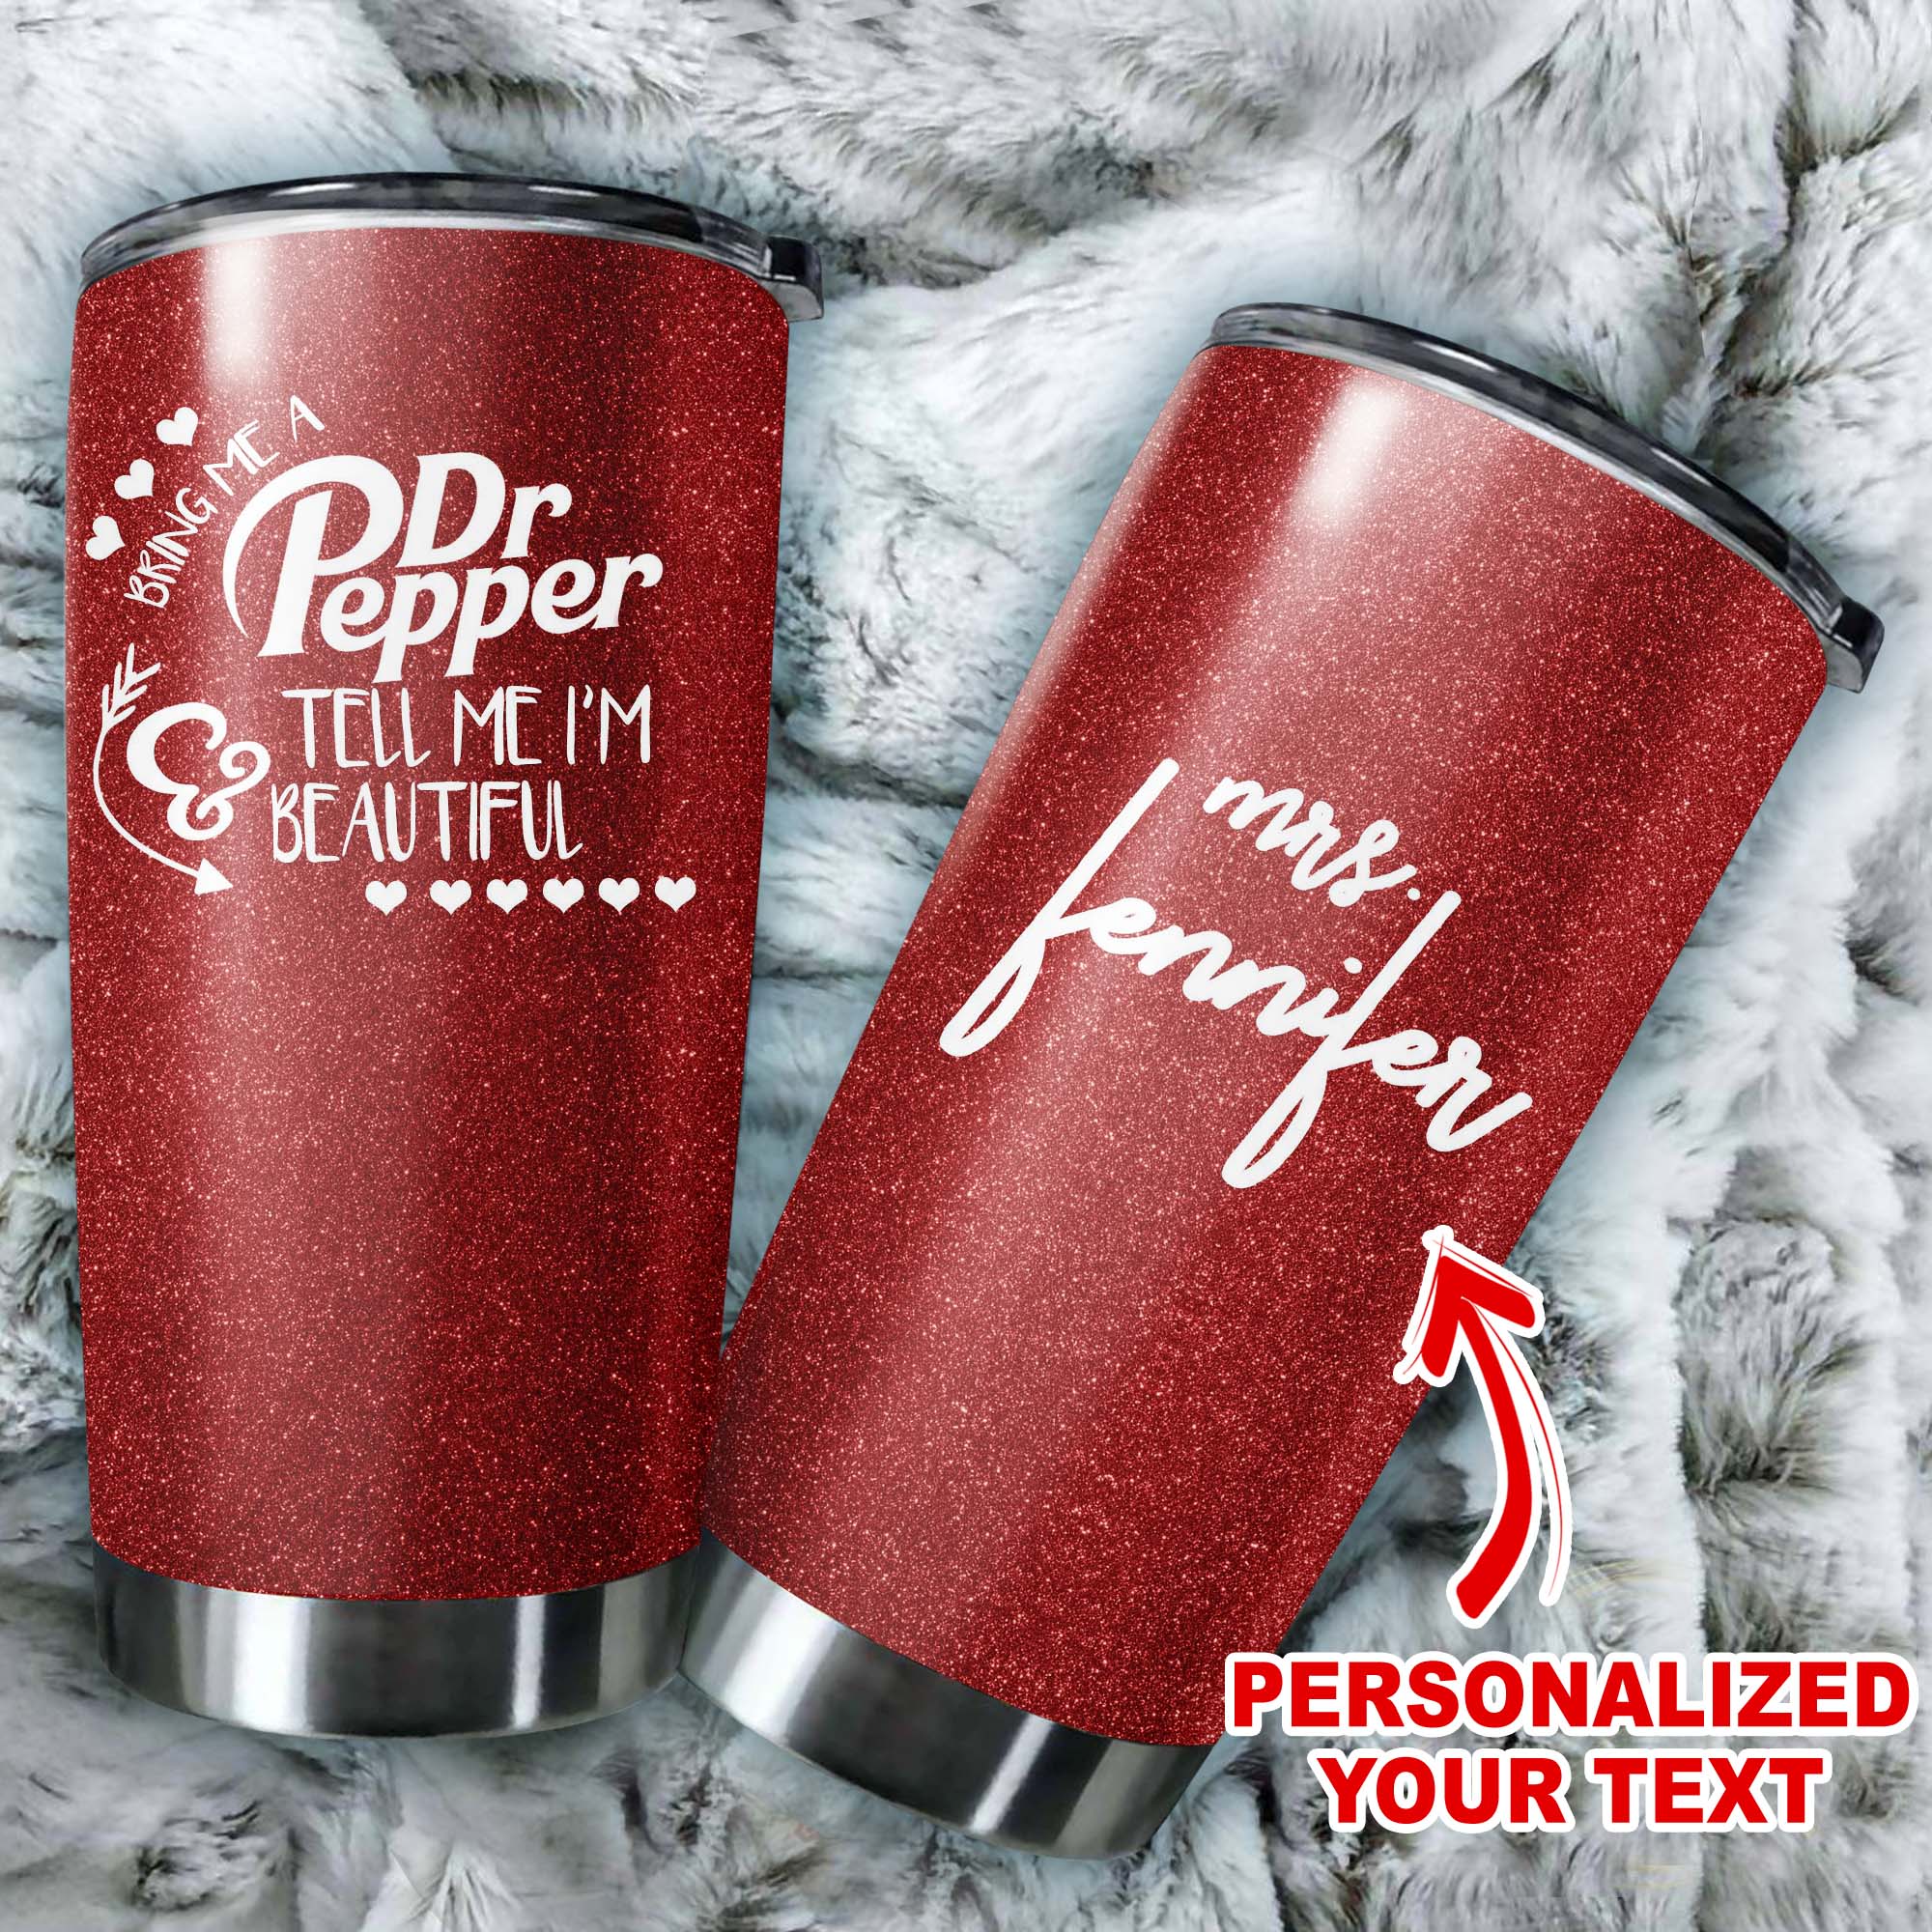 Personalized dr pepper tell me i'm beautiful all over printed tumbler 4